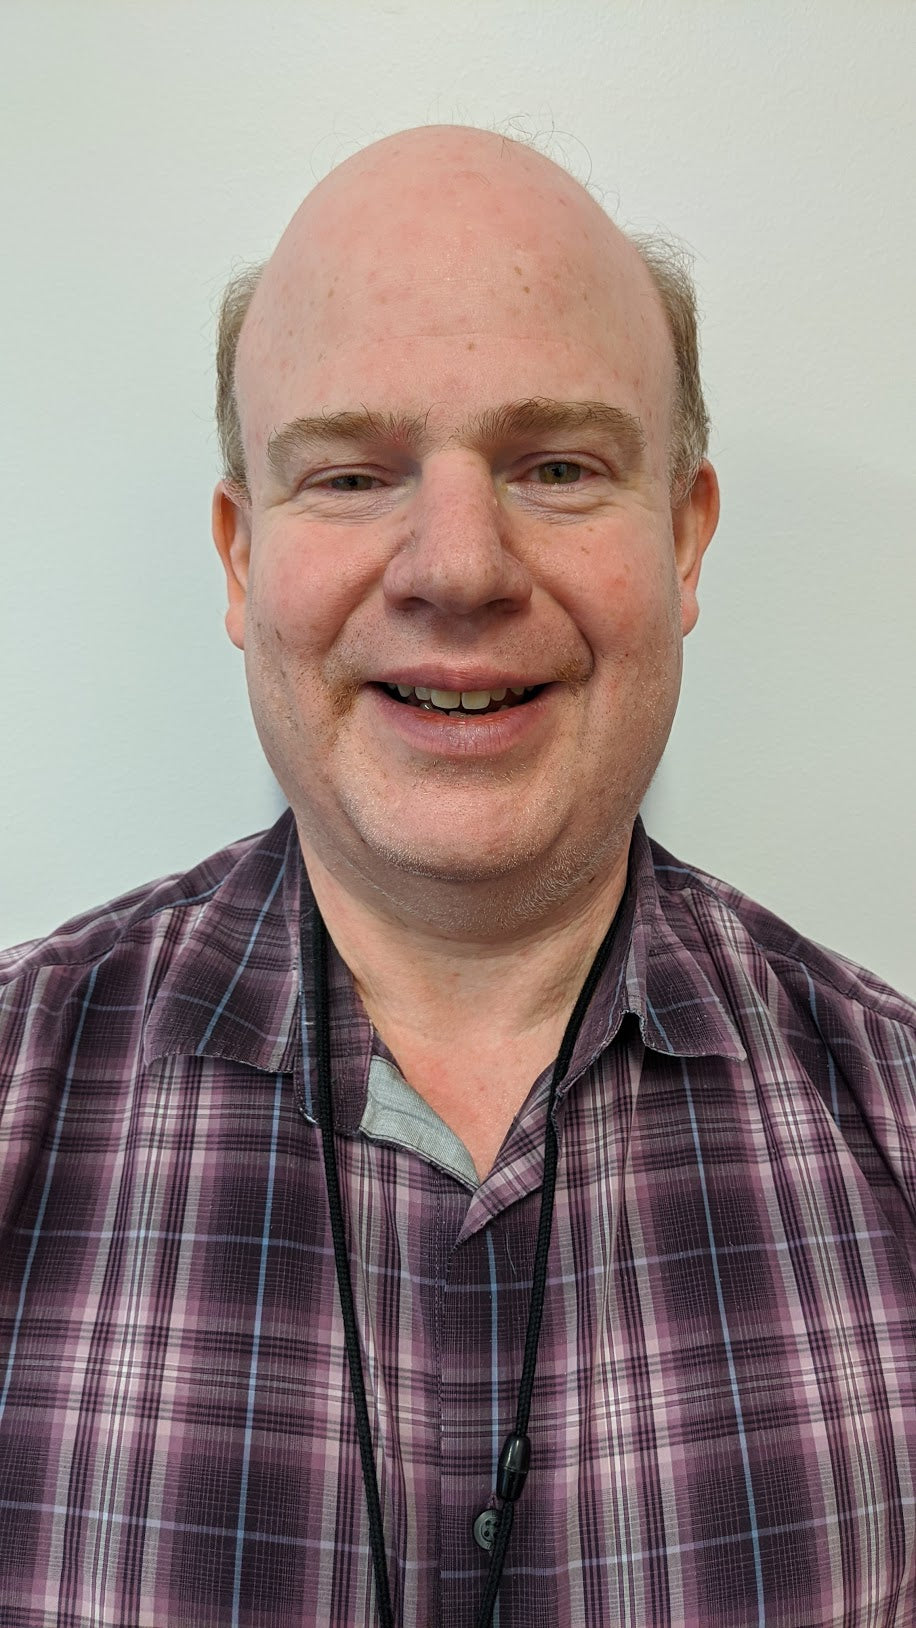 older man with receding hairline, smiling. Wearing a plaid colored shirt